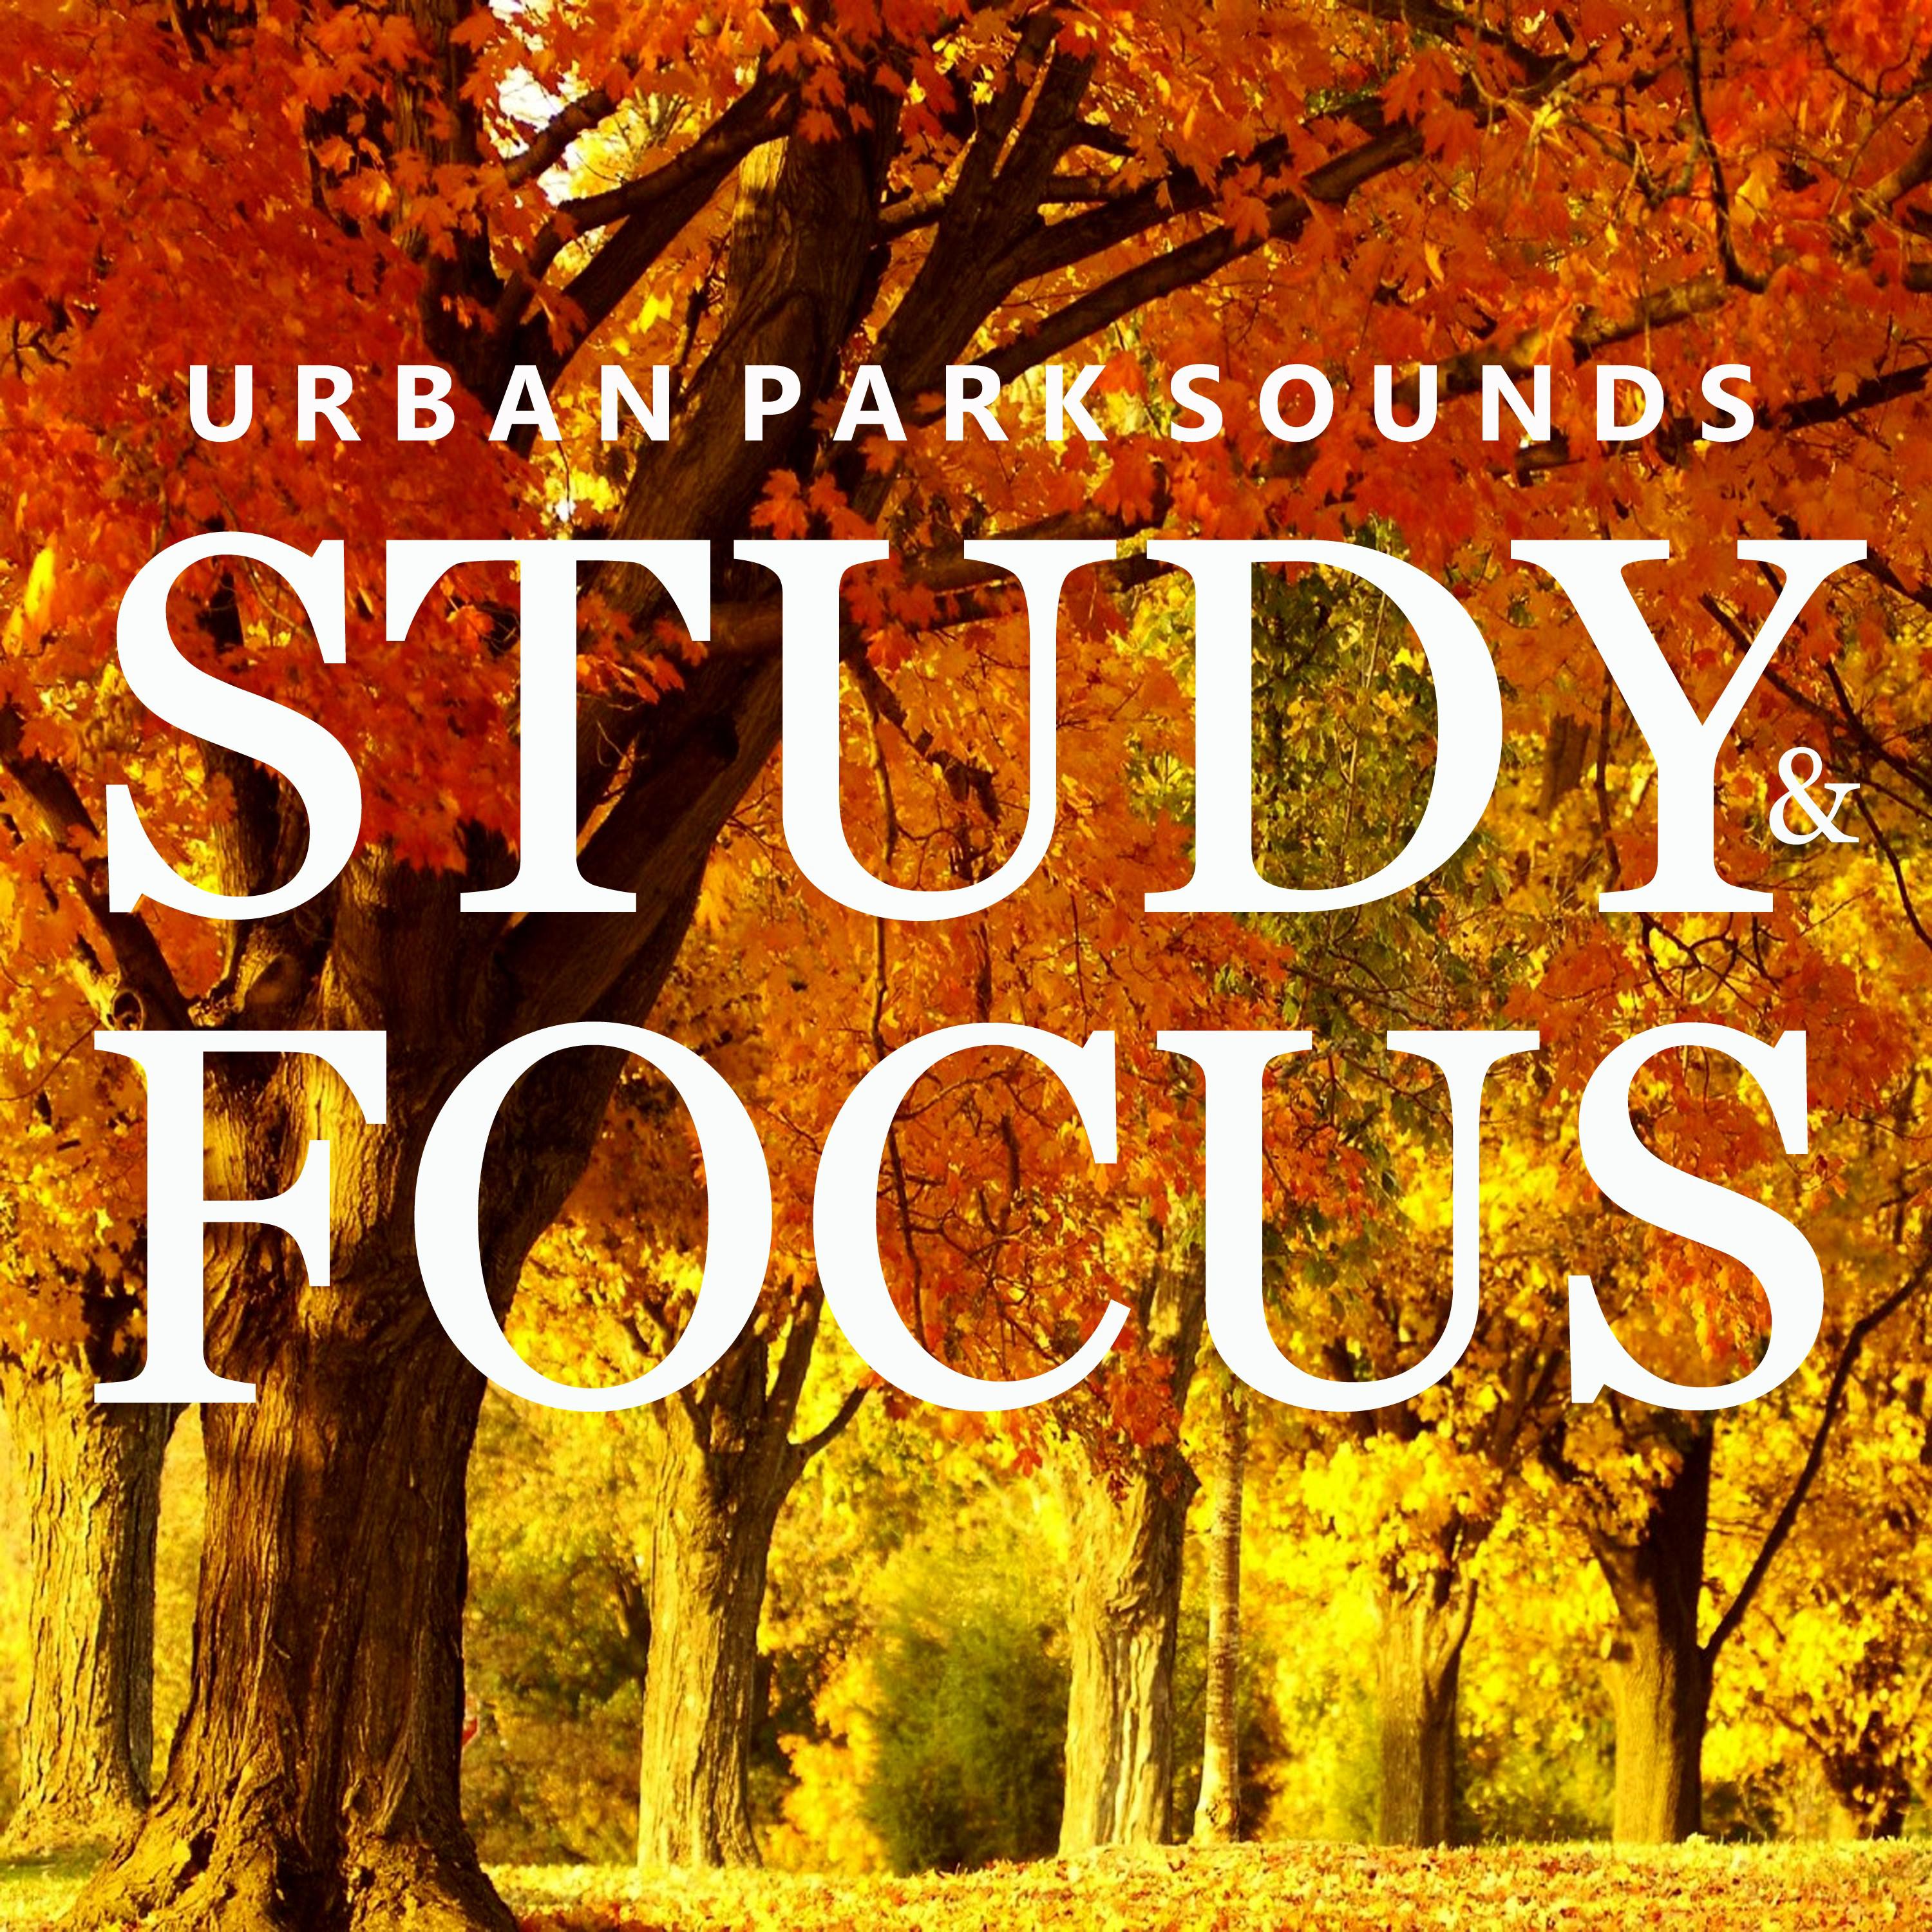 Urban Park Sounds for Studying, Pt. 26